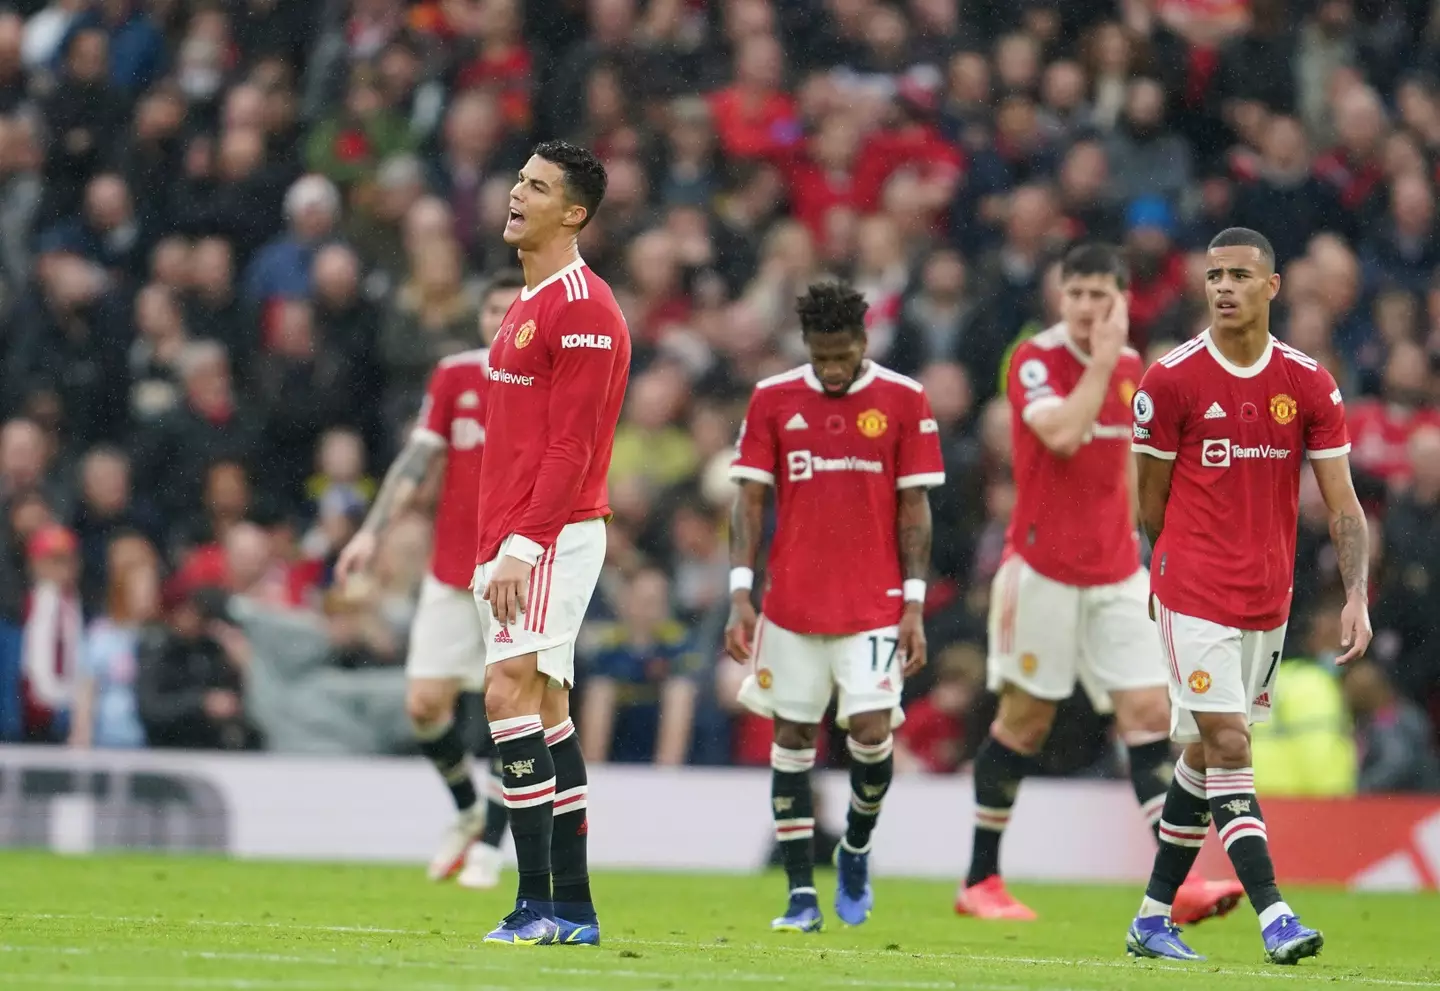 United players look dejected after City's second. Image: PA Images